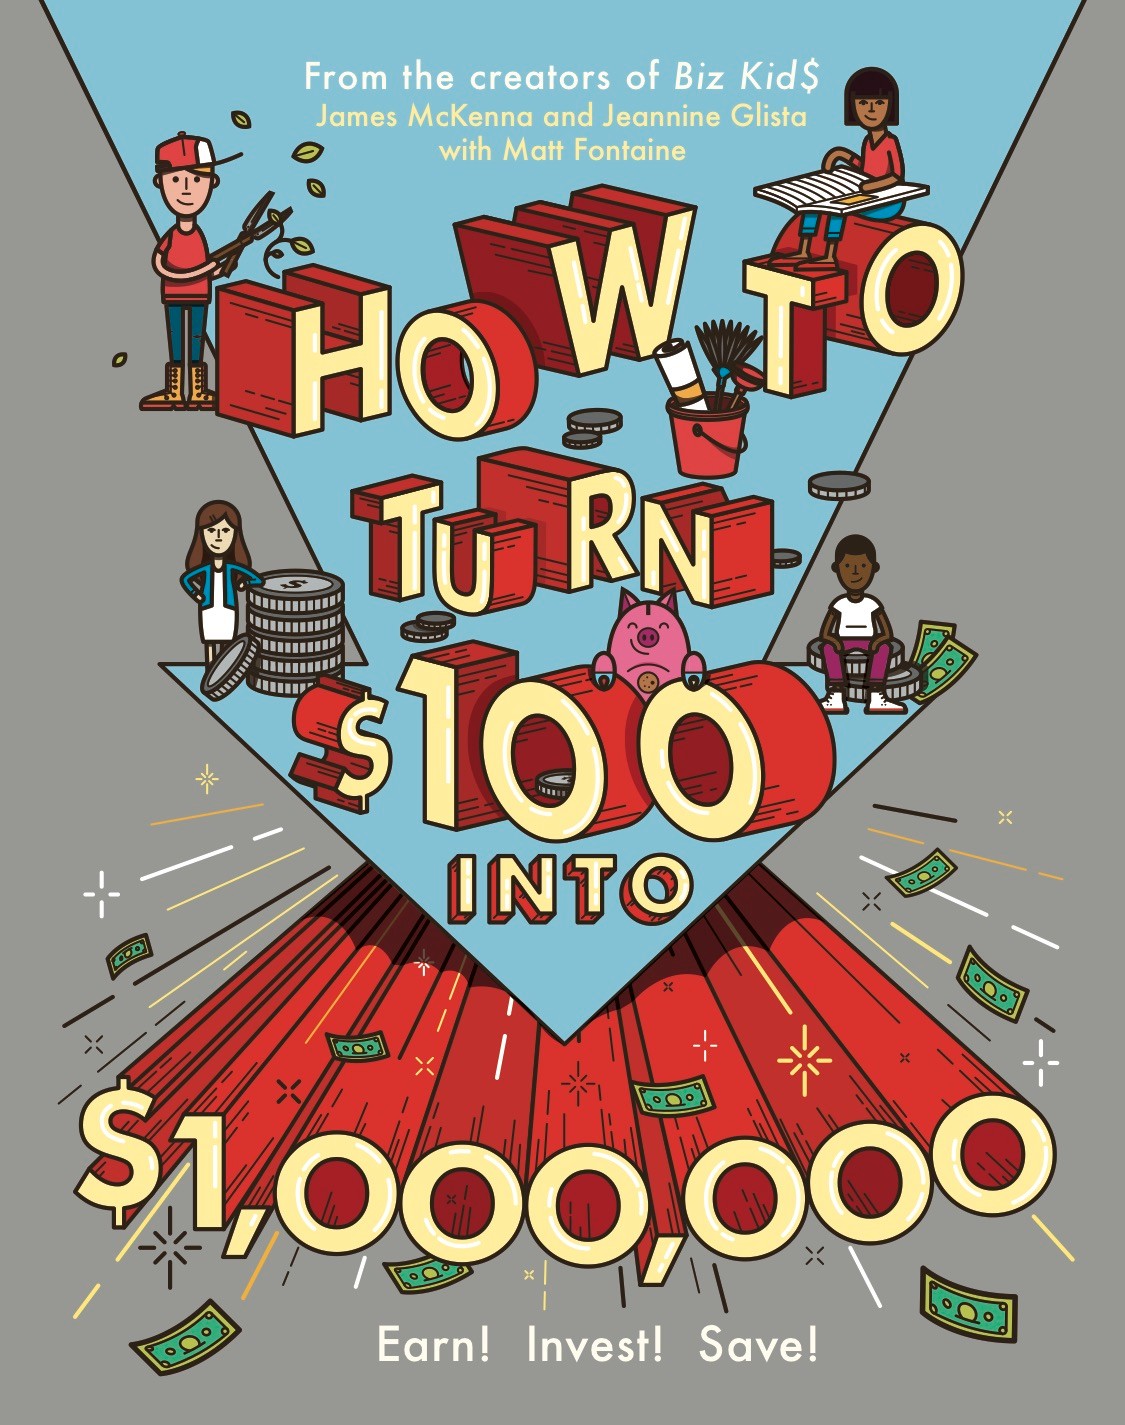 How To Turn $100 Into $1 Million